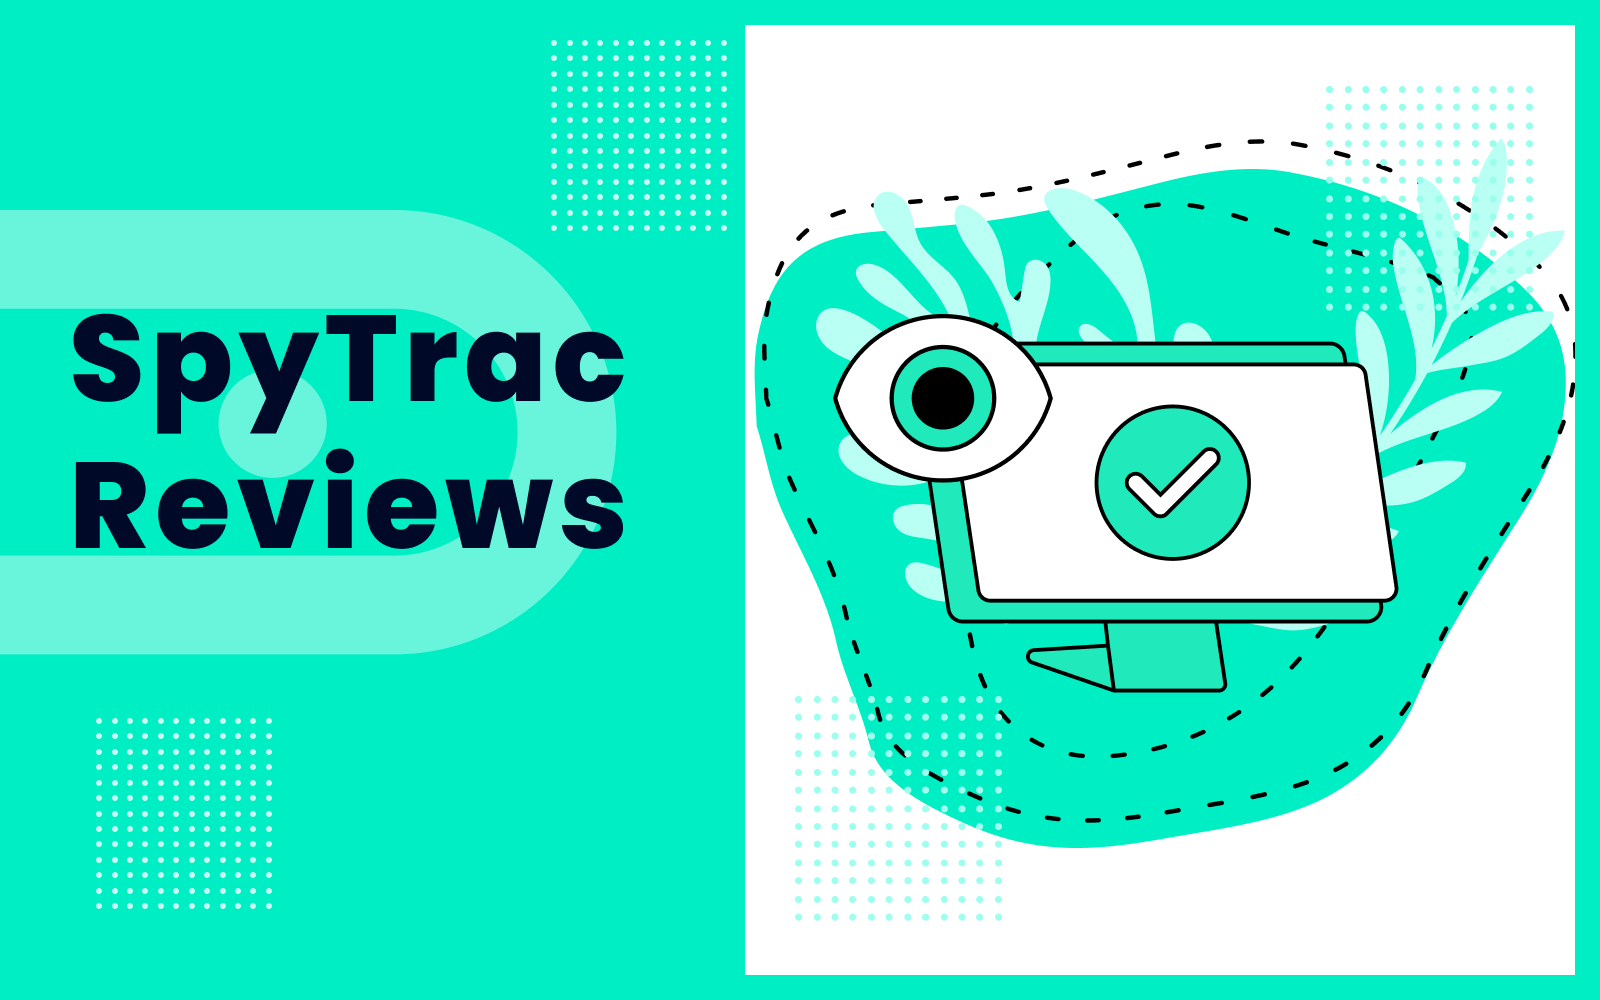 SpyTrac Reviews 2022: Read this Fair Overview